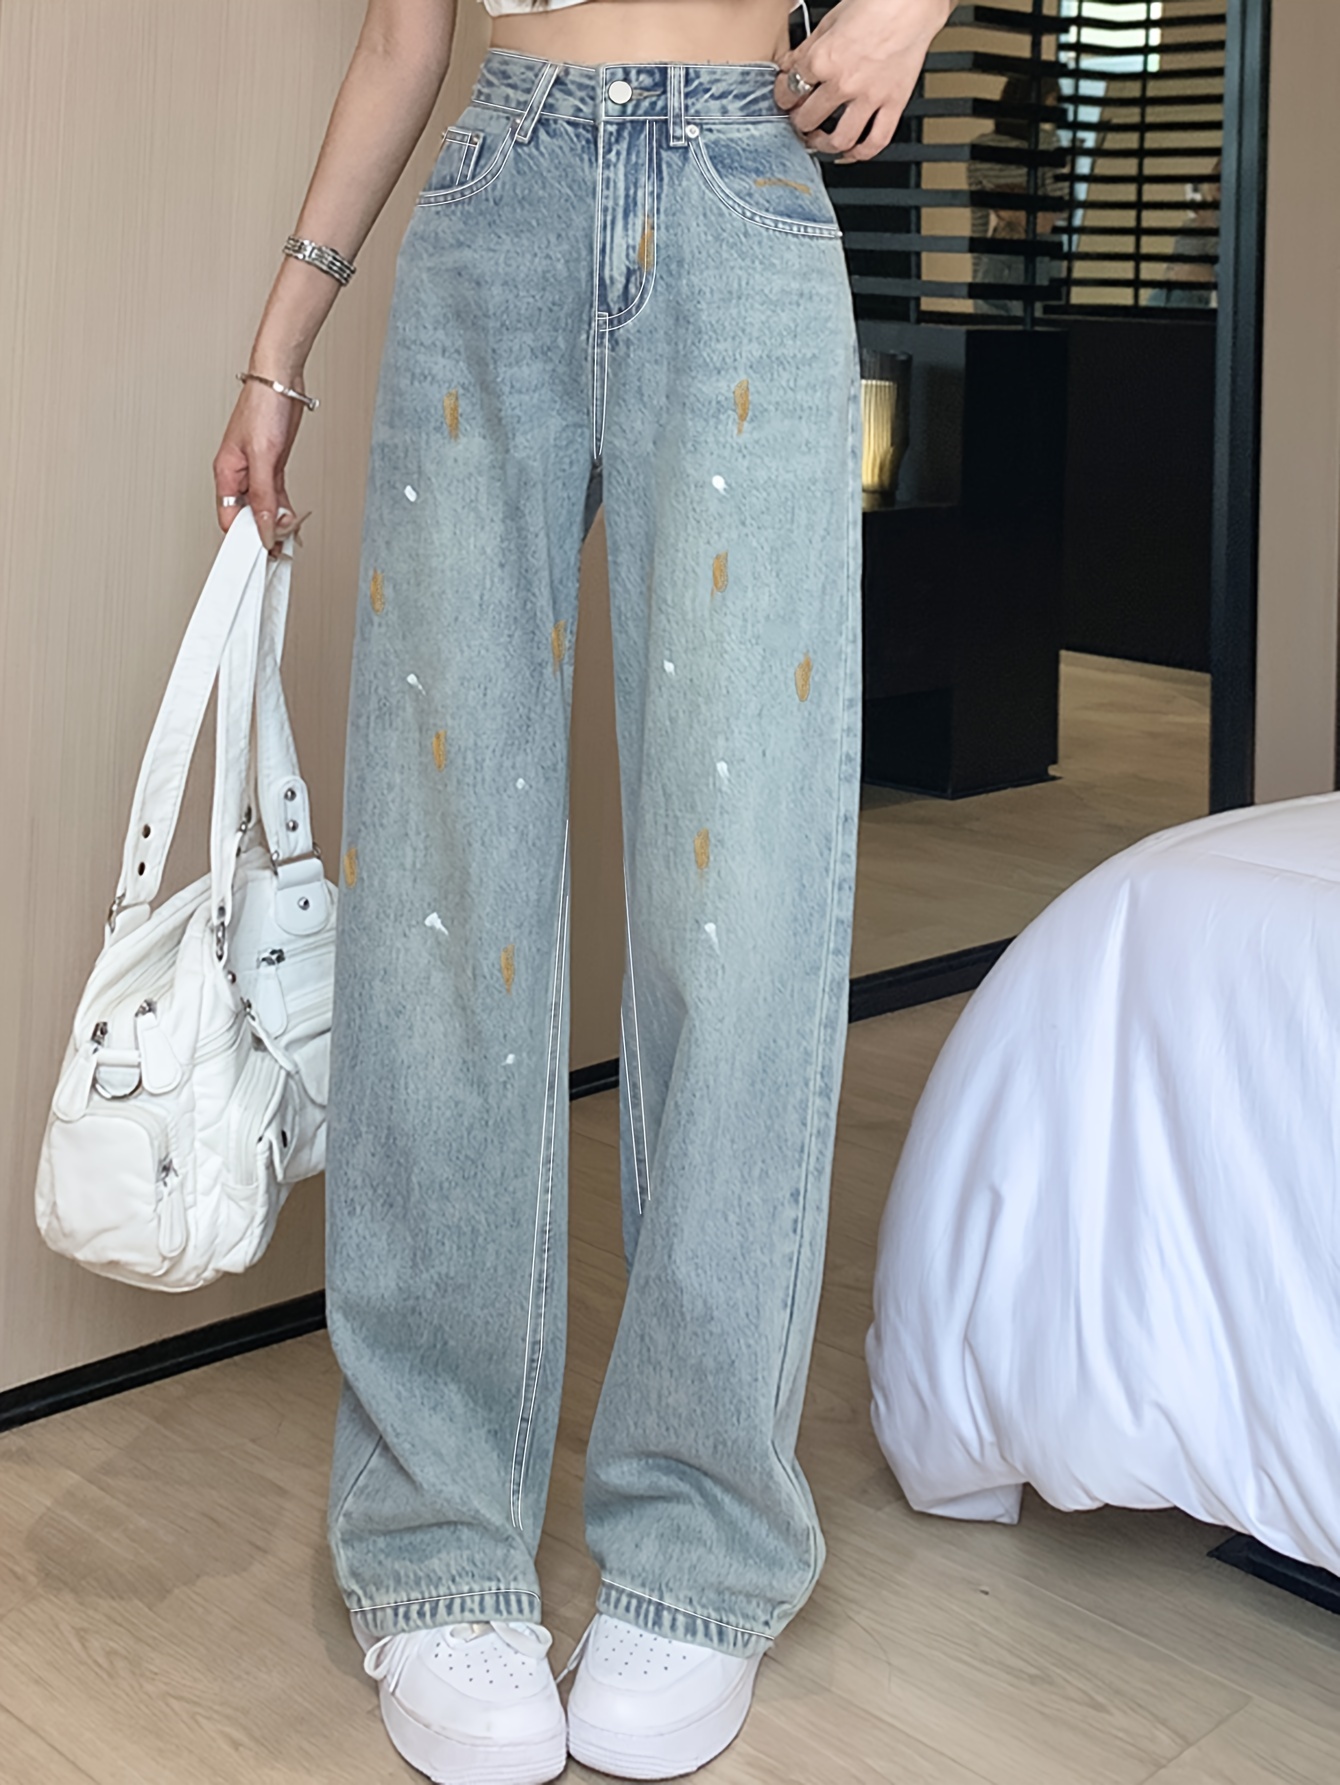 Star Print Patch Pockets Y2k Baggy Jeans, Black Loose Casual E-girl Style  Cargo Denim Pants With Slash Pockets, Women's Denim Jeans & Clothing